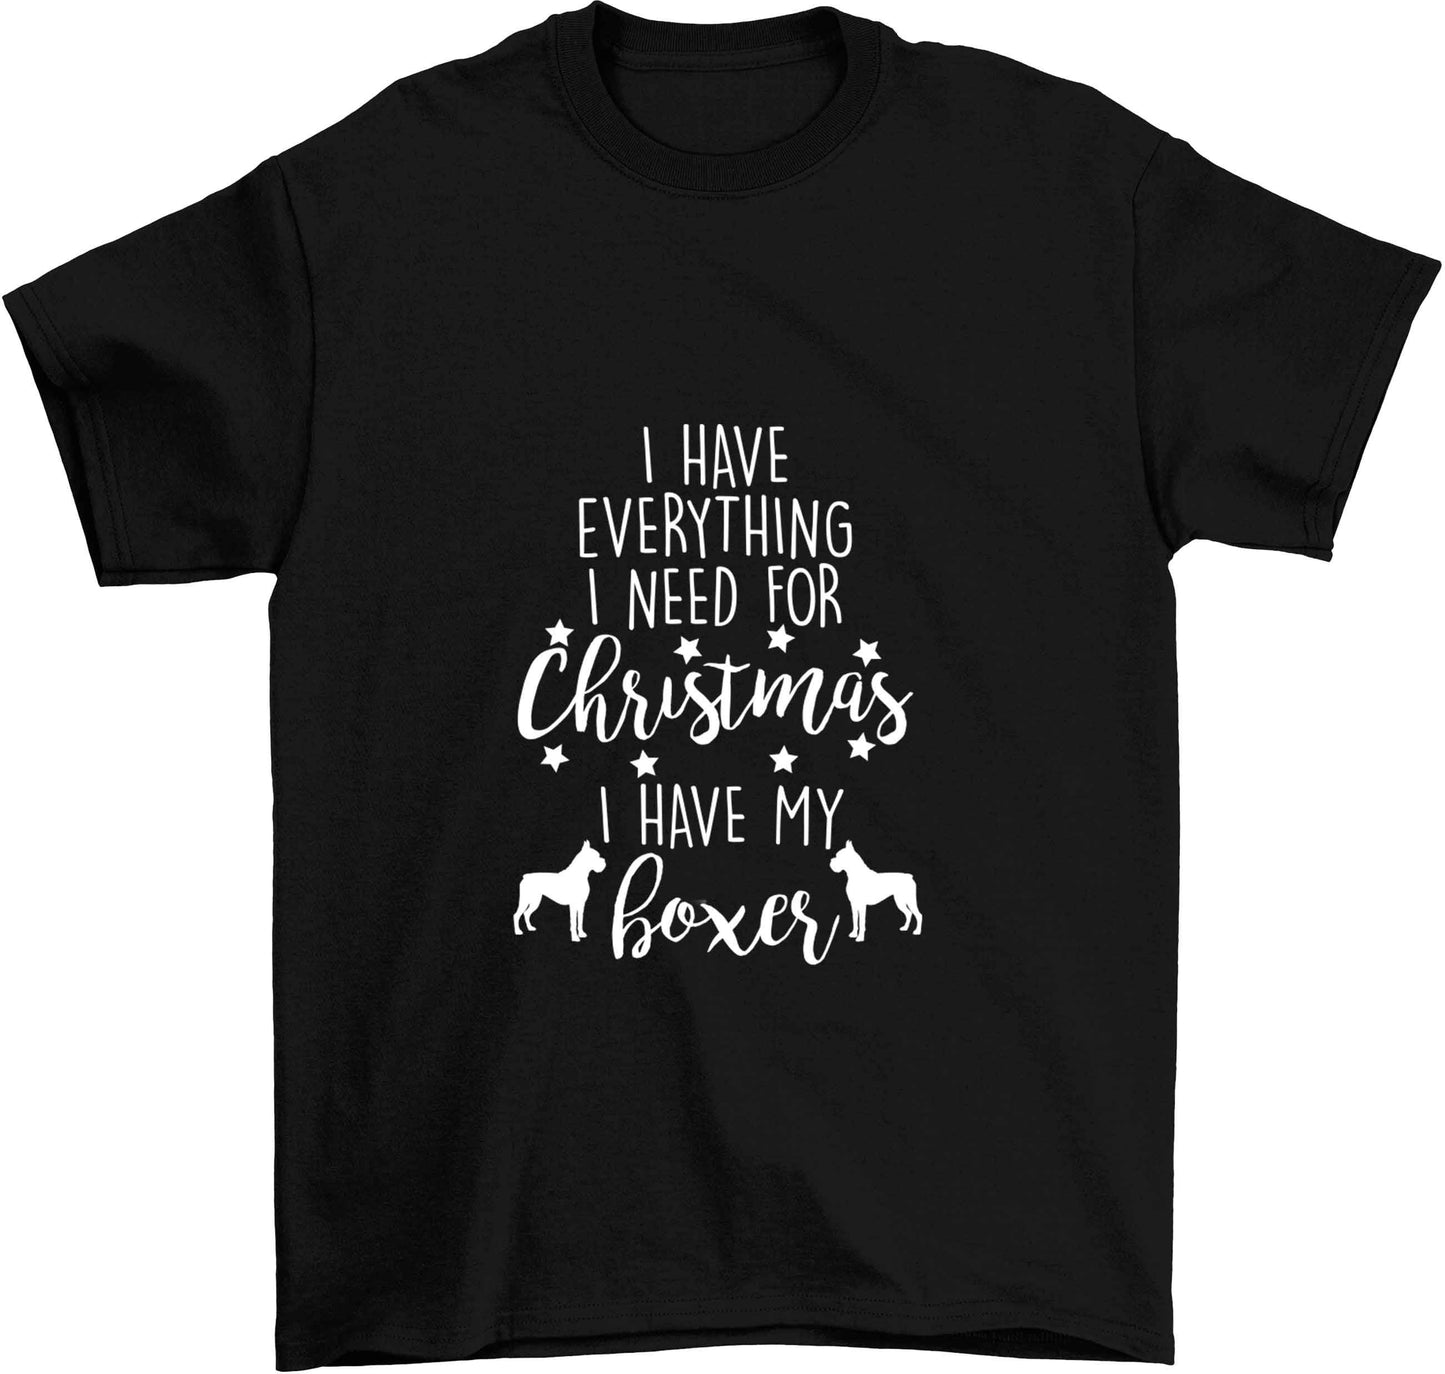 I have everything I need for Christmas I have my boxer Children's black Tshirt 12-13 Years